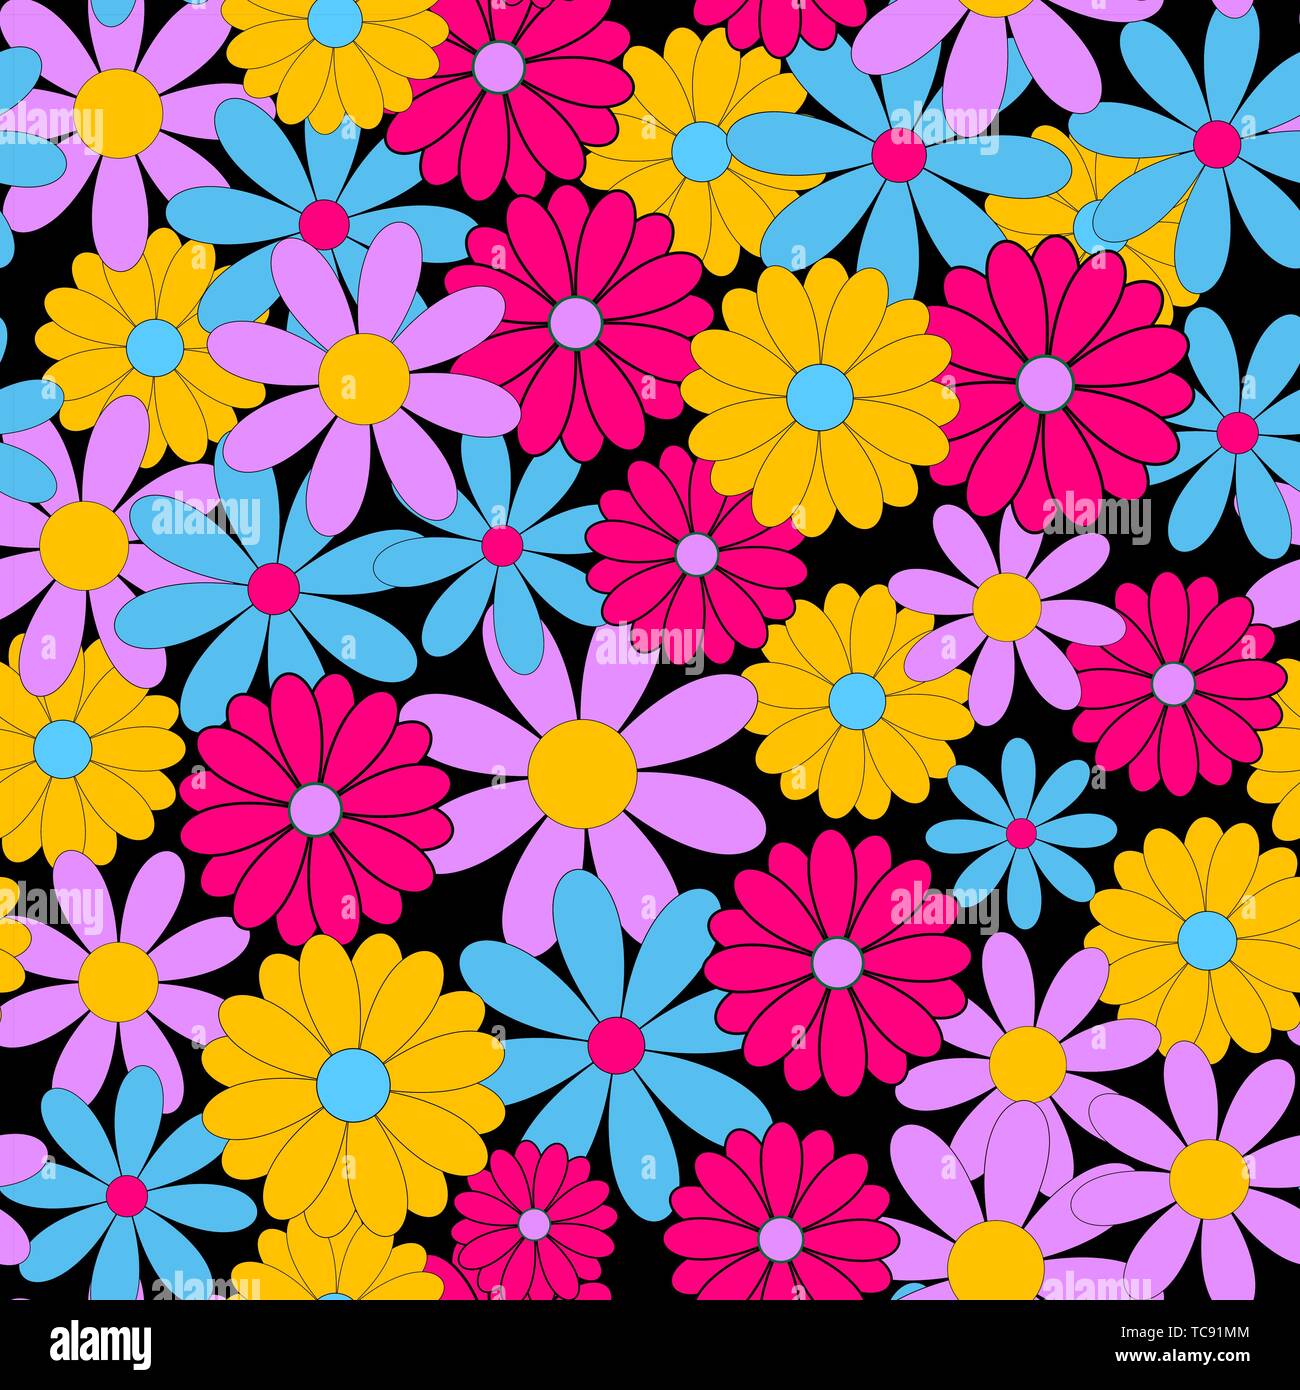 Bright colored spring flowers Stock Vector Images - Alamy